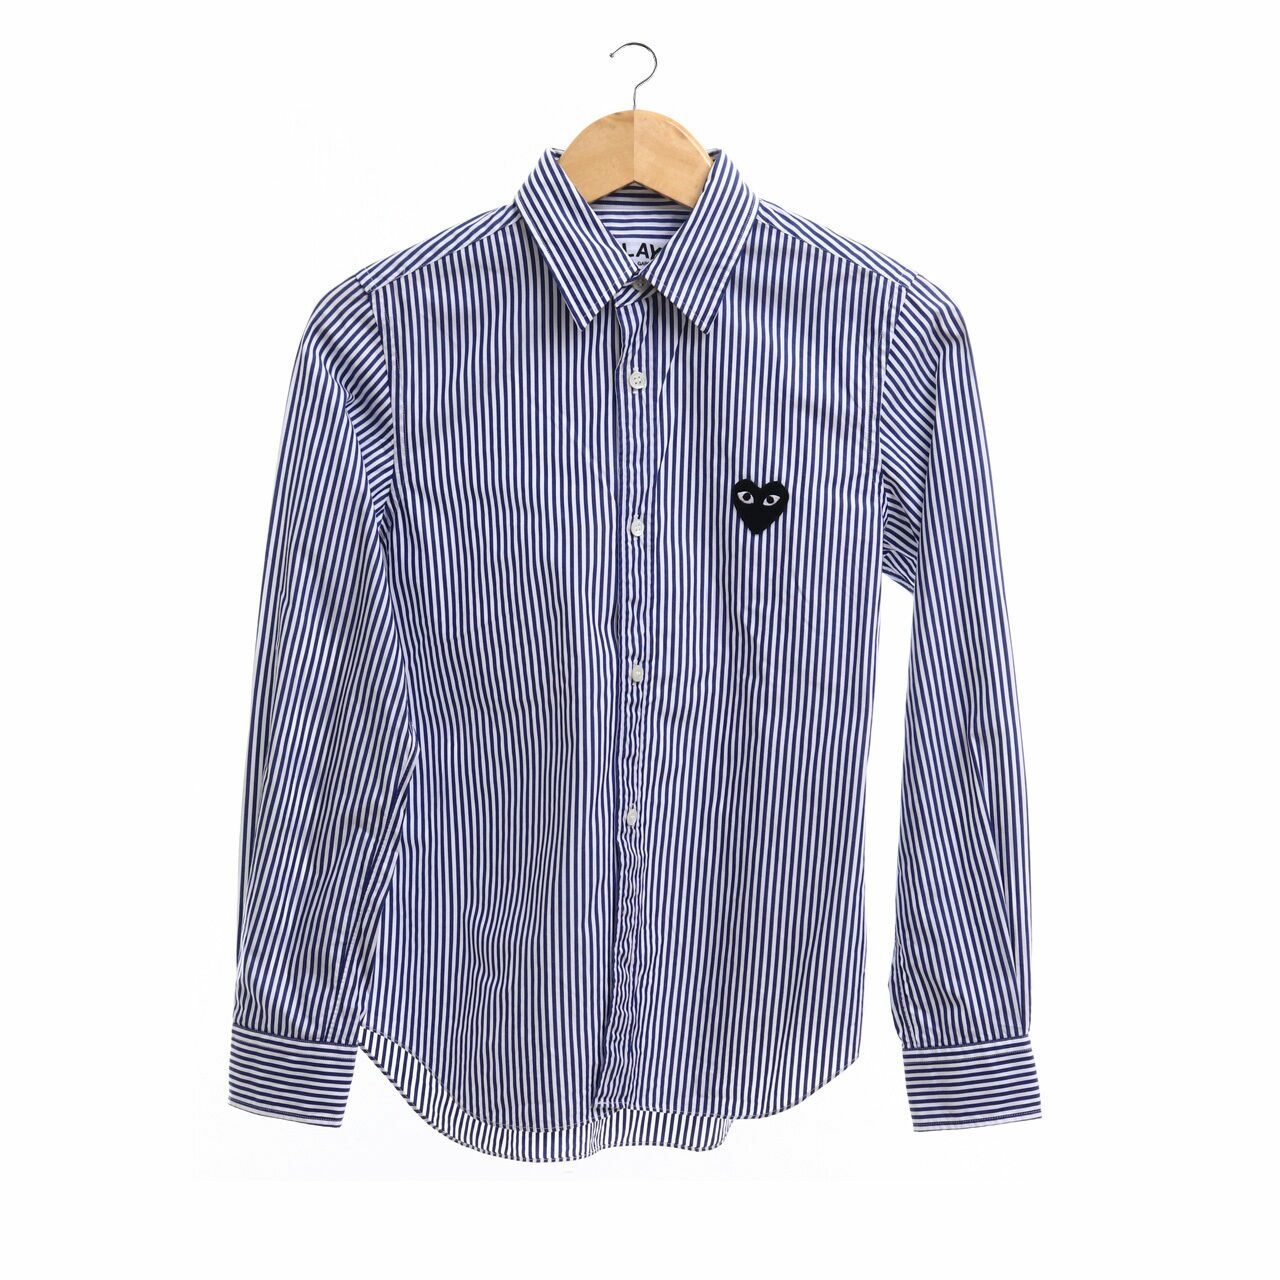 Play by Comme des Garcons White & Dark Blue Stripes Shirt	